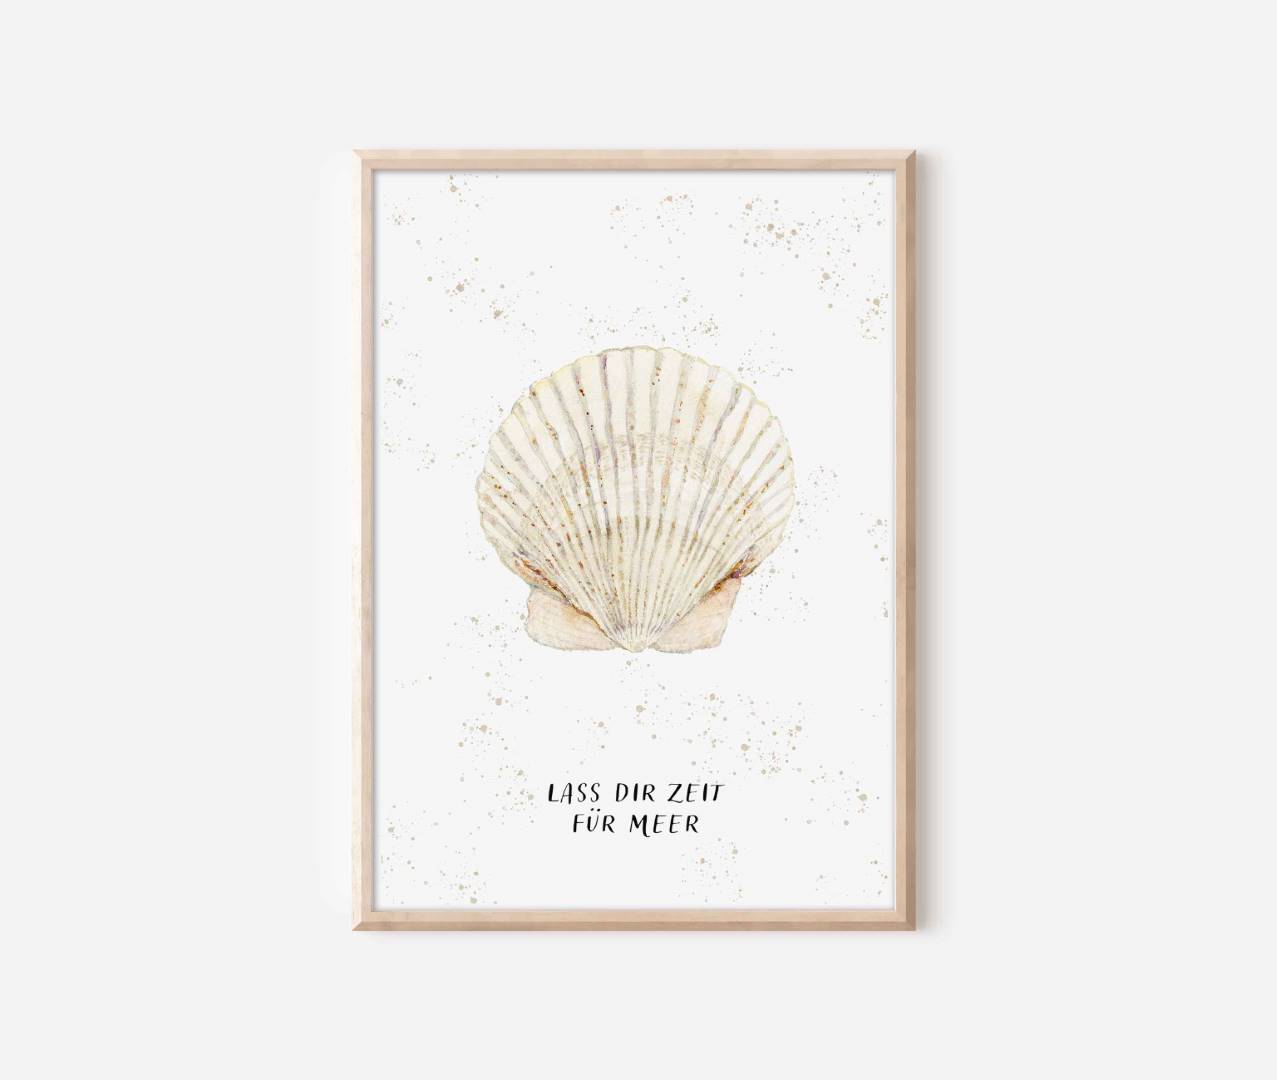 a framed print of a seashell on a white wall